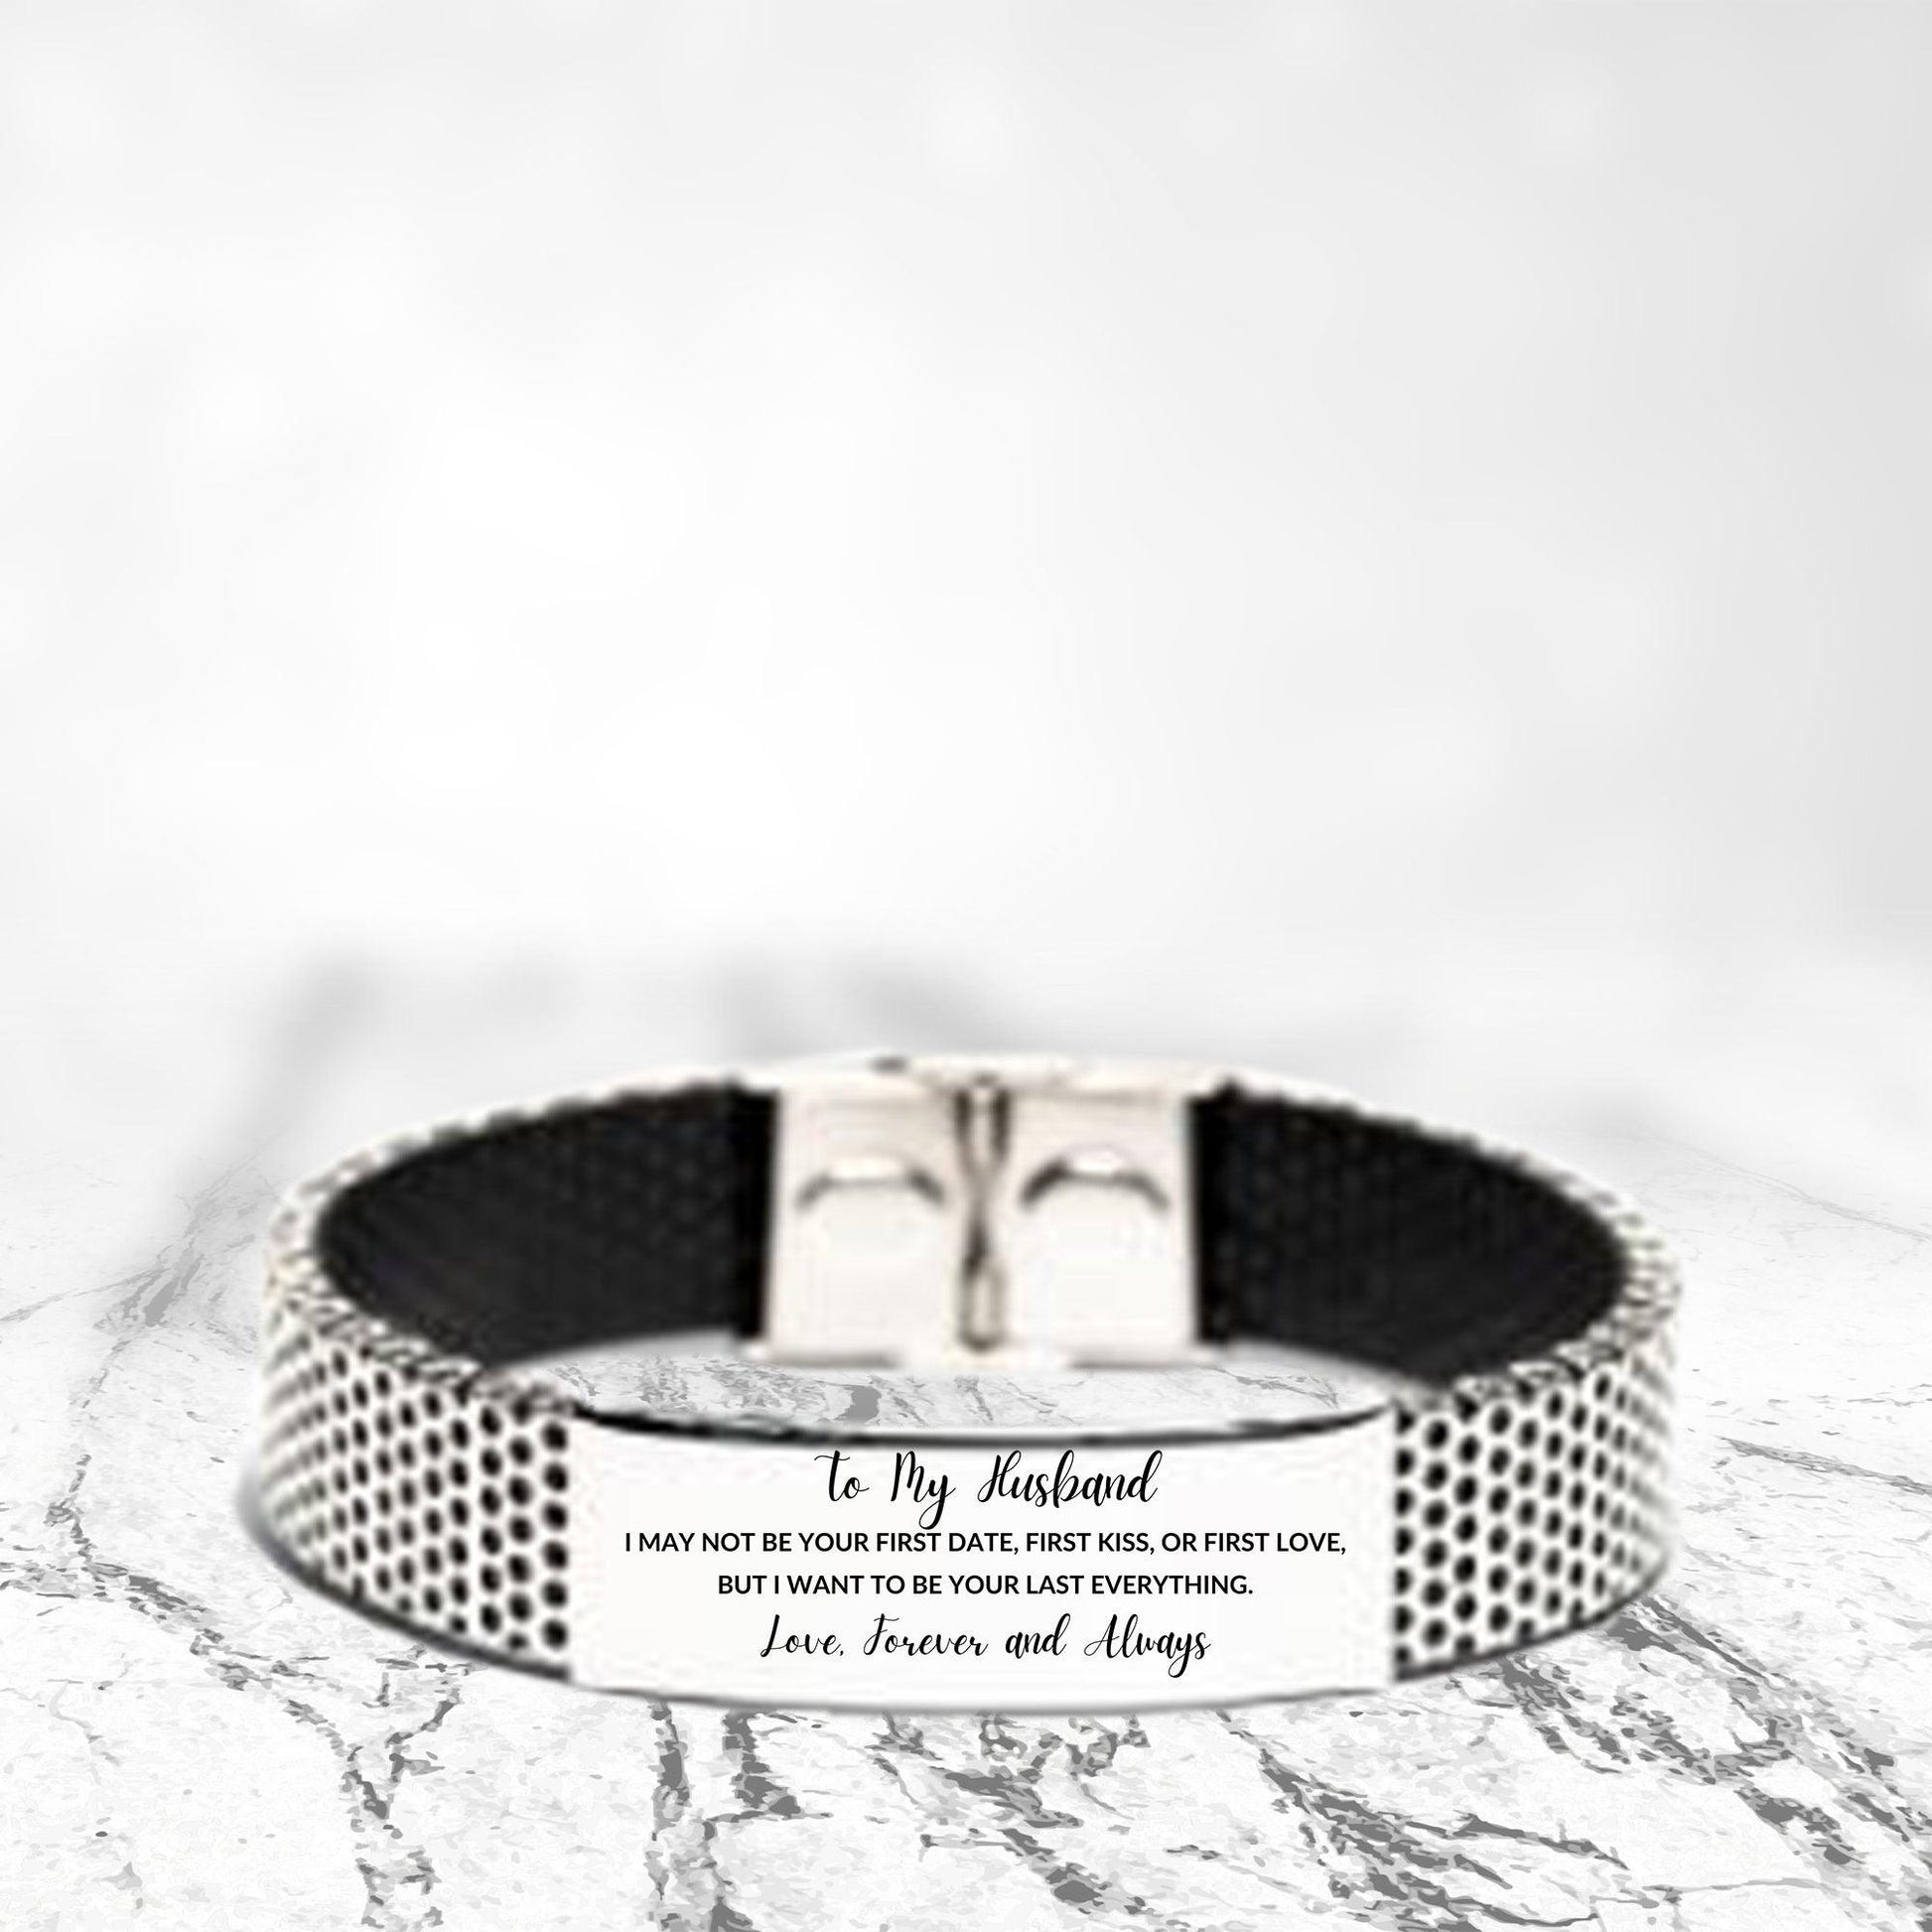 To My Husband I Want to Be Your Last Everything Engraved Stainless Steel Mesh Bracelet, Romantic Birthday, Valentine, Gifts - Mallard Moon Gift Shop